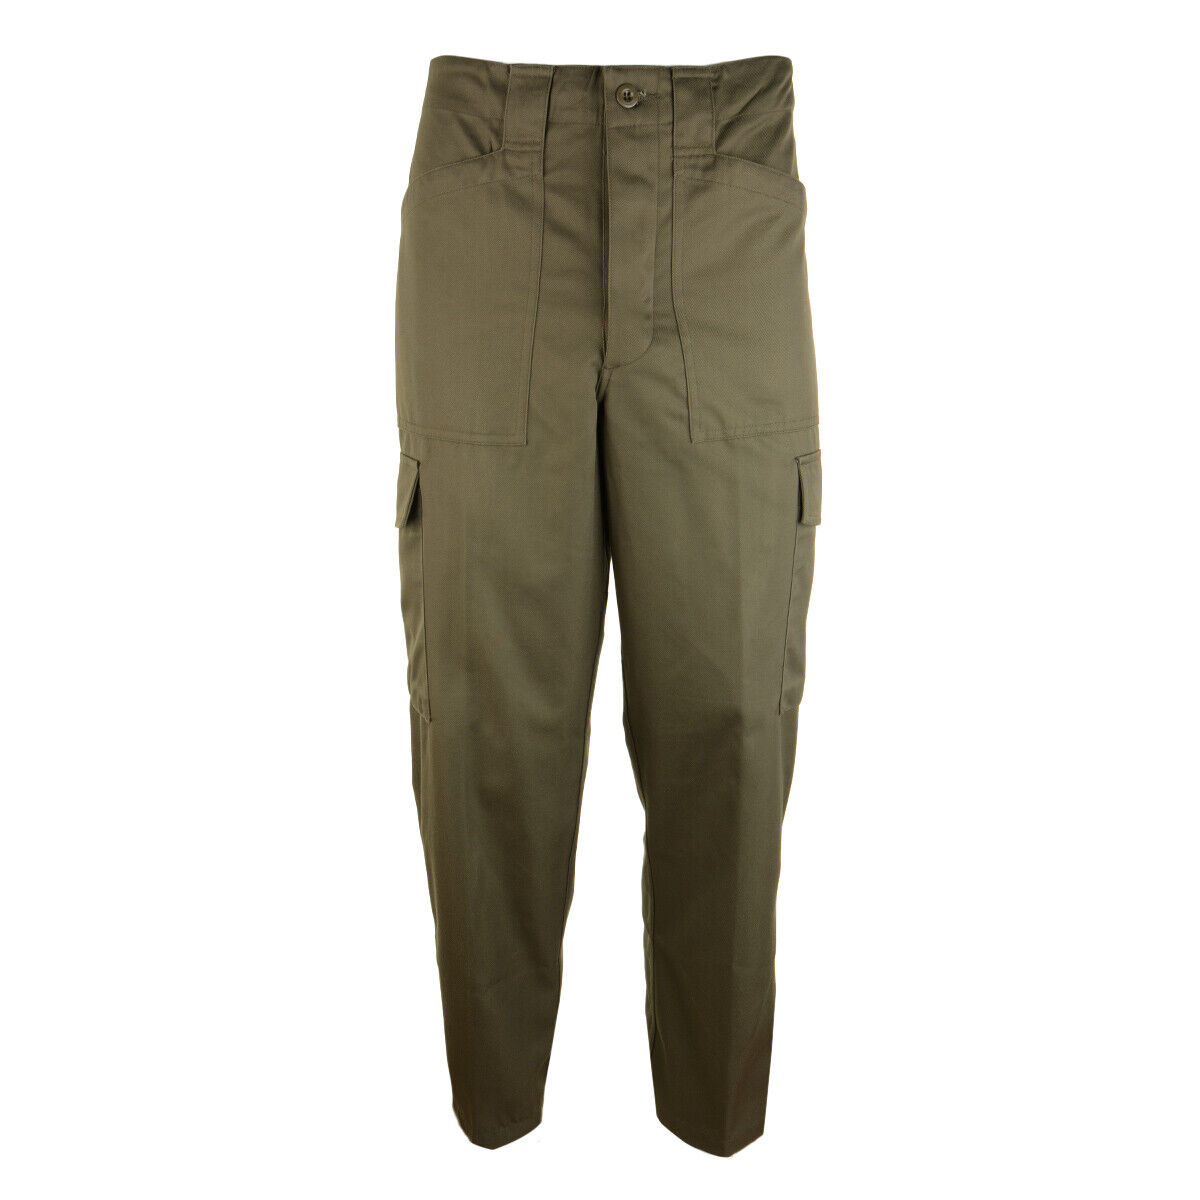 Original Austrian Army Field Trousers - New Unissued - Olive Green Cotton Mix